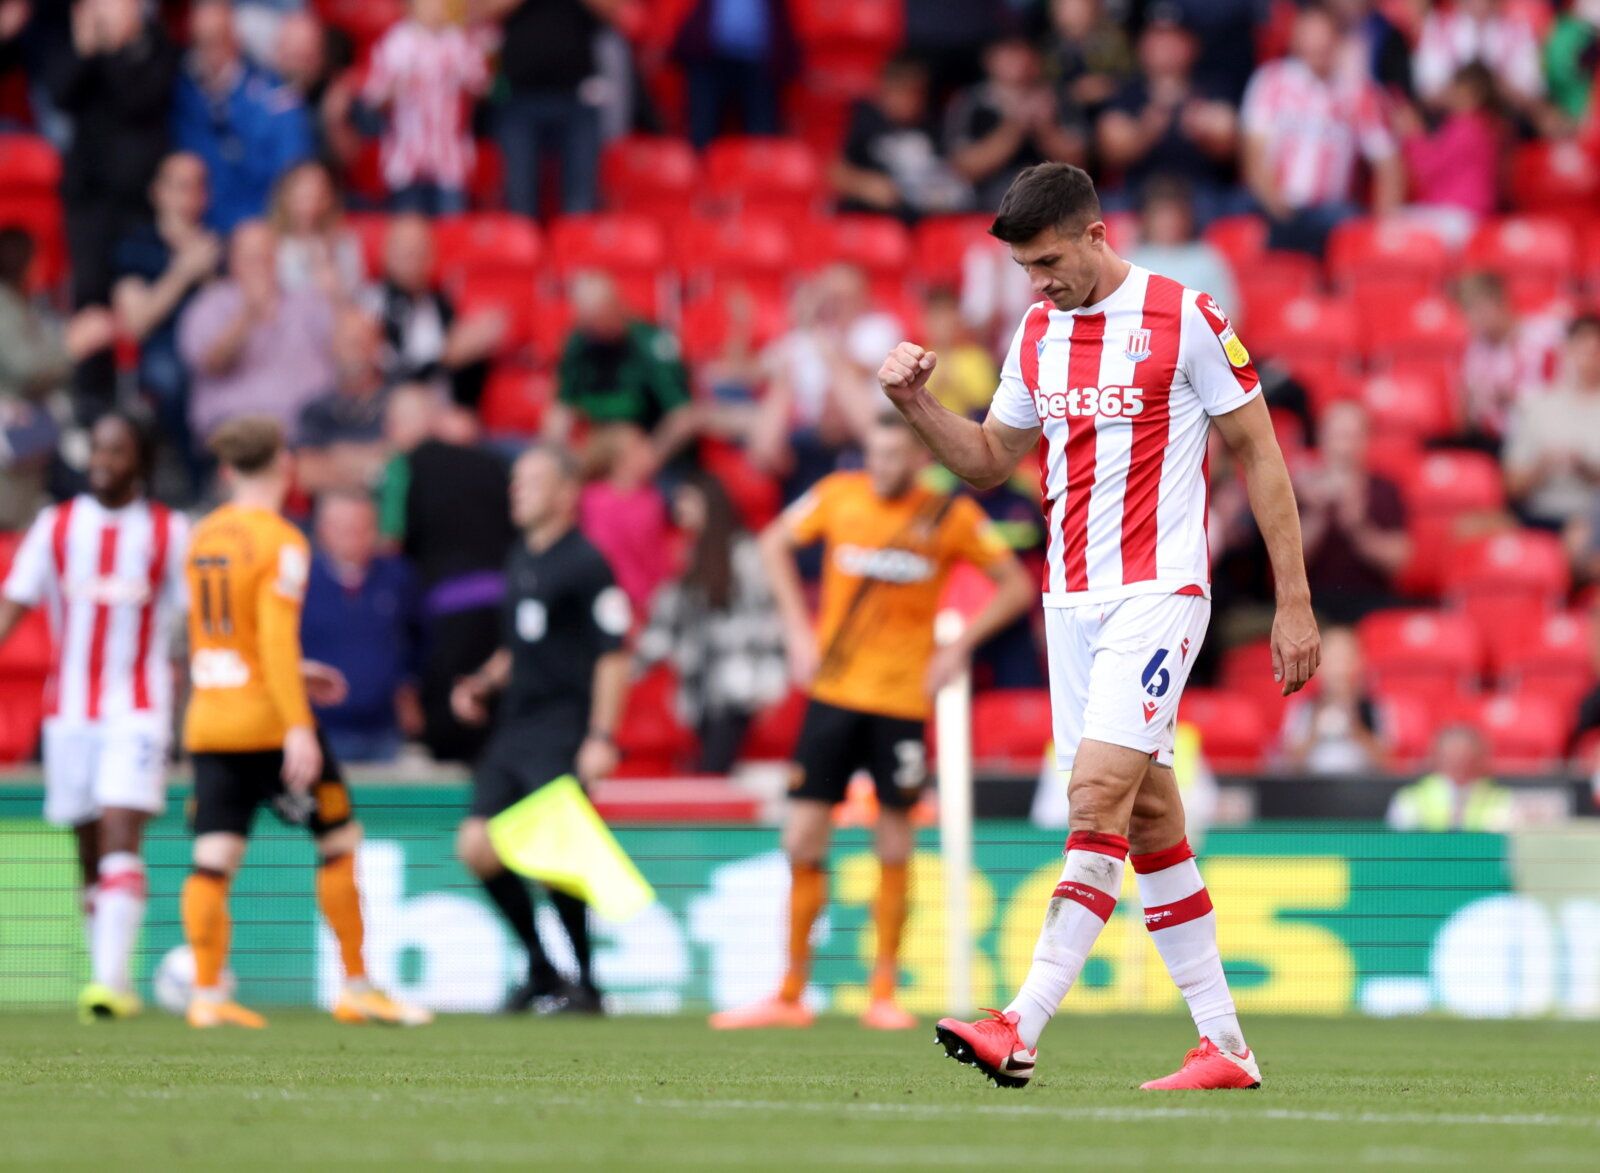 Soccer Football - England - Championship - Stoke City v Hull City - bet365 Stadium, Stoke-on-Trent, Britain - September 25, 2021  Stoke City's Danny Batth celebrates after the match   Action Images/John Clifton   EDITORIAL USE ONLY. No use with unauthorized audio, video, data, fixture lists, club/league logos or 